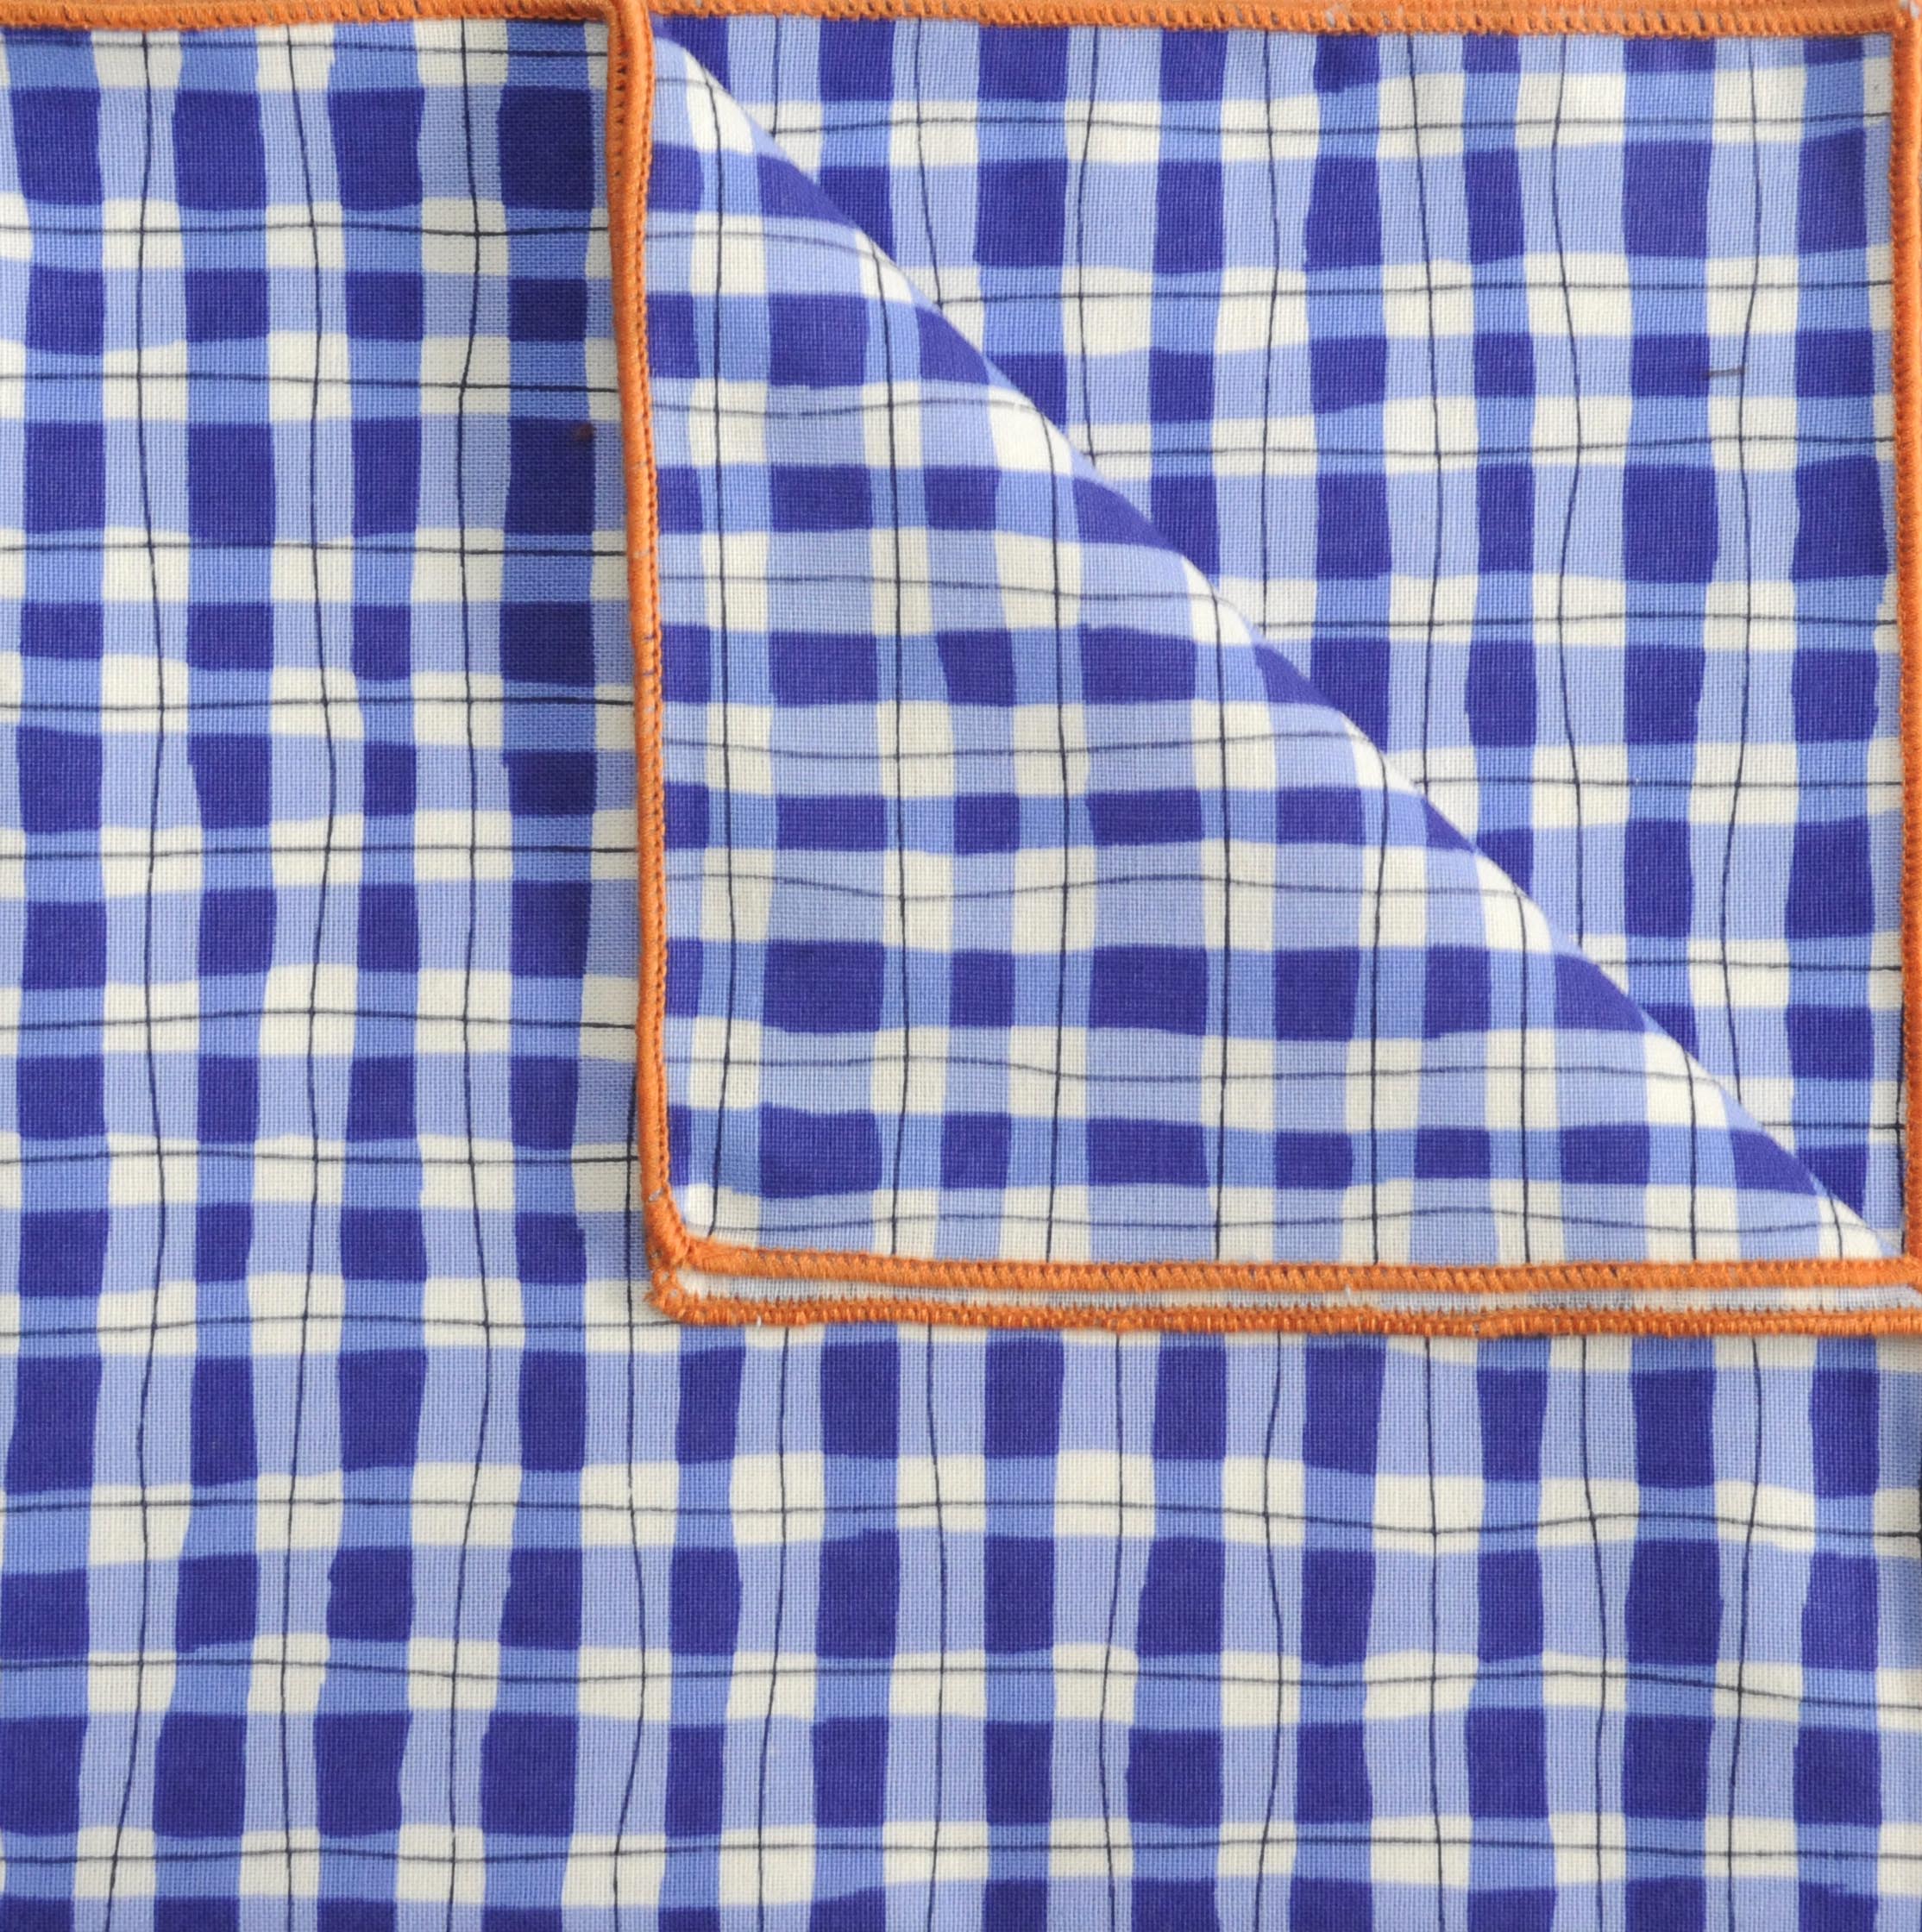 Mac - Check Print Cotton Handkerchief in Blue and White with Orange